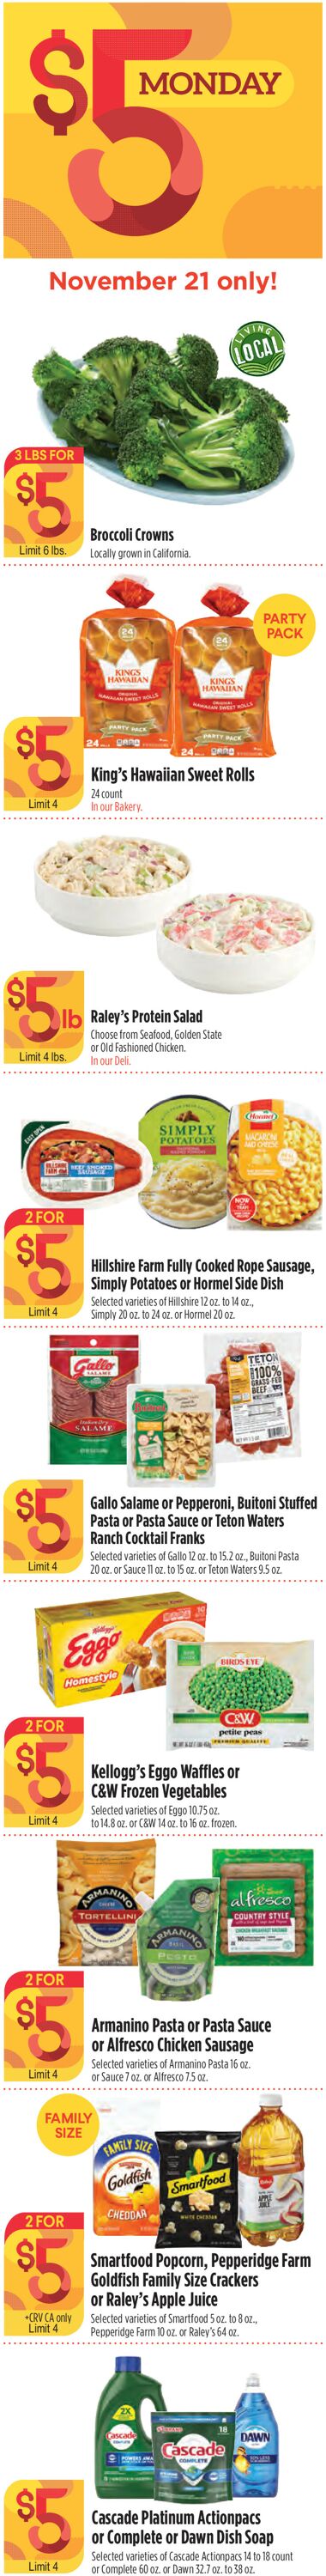 Catalogue Raley's from 11/16/2022